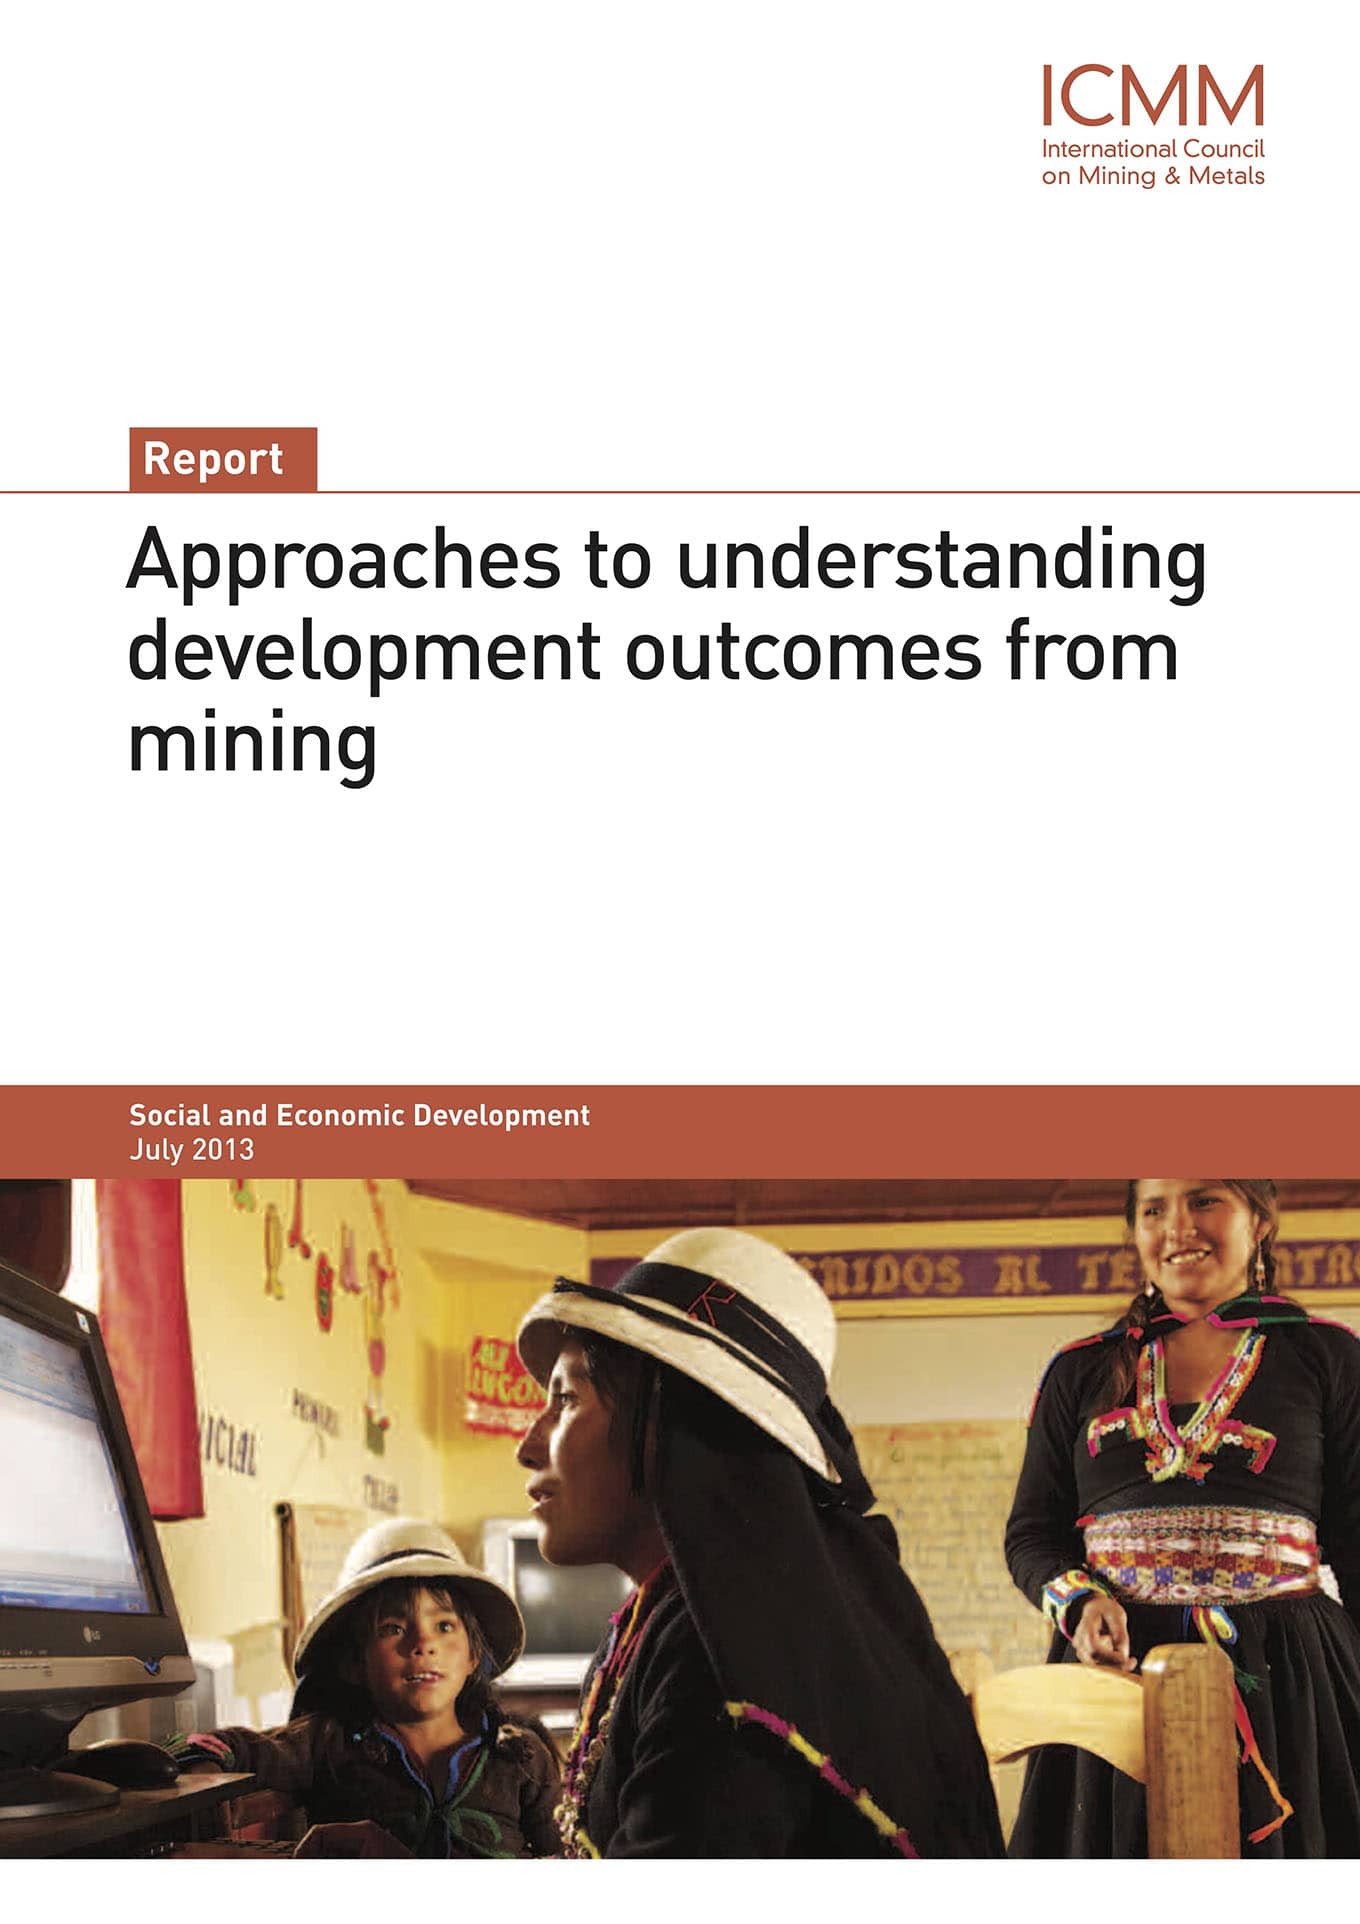 Approaches to Understanding Development Outcomes from Mining (ICMM, 2013)